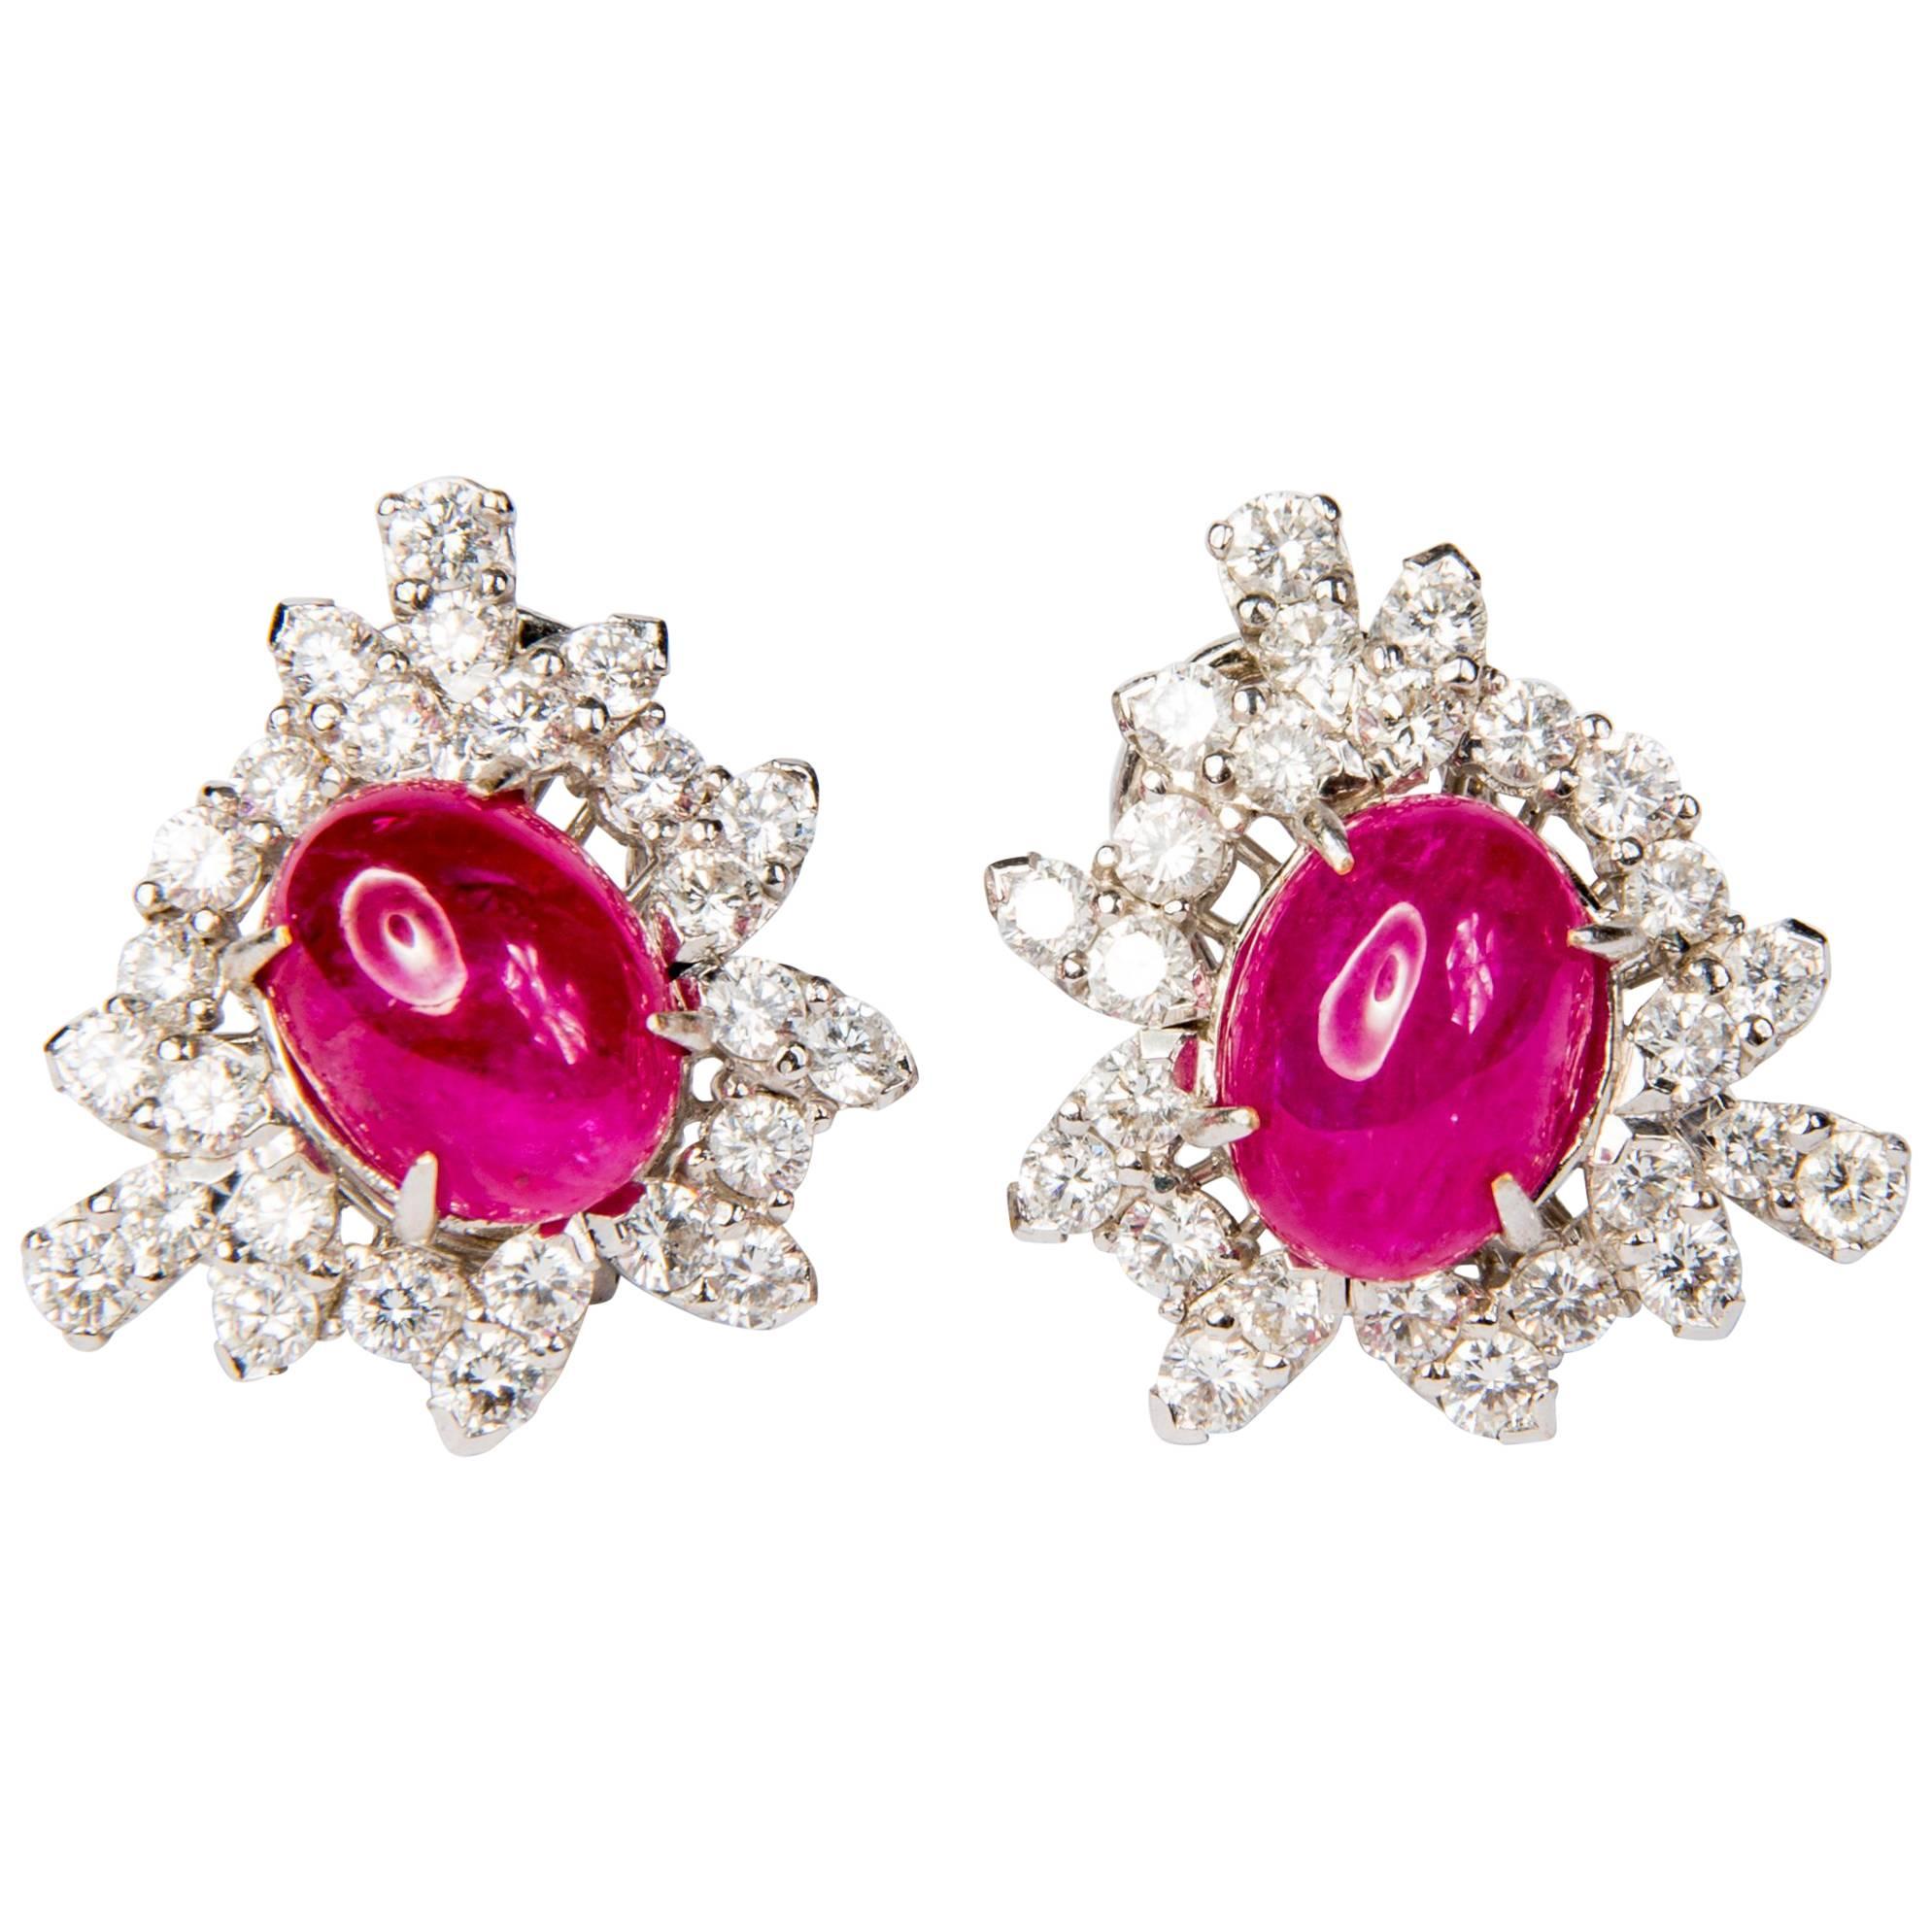 These ruby and diamond earrings are elegant and versatile. 9.54ct ruby cabochons and 2.87ct diamonds are mounted in 18K white gold. Unique pair of handcrafted piece that will compliment your outfit perfectly.

They come with studs and clips, which